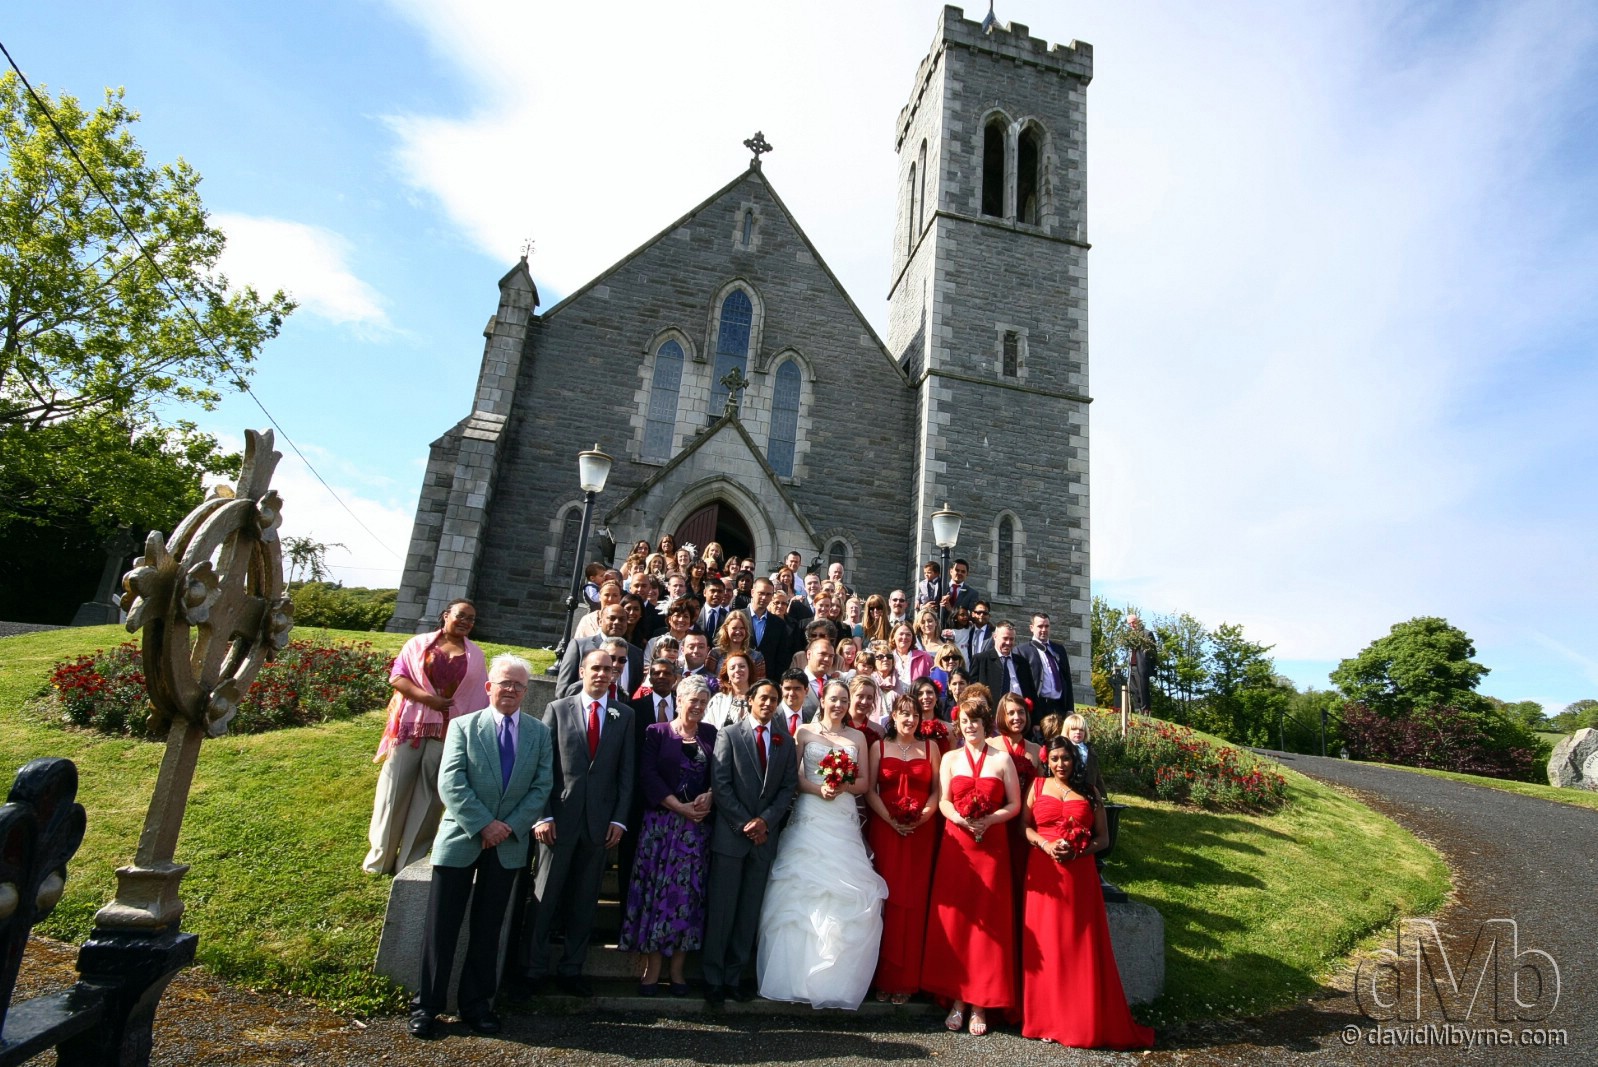 The congregation, minus yours truly, of Clare & Michael's wedding at the Church of the Sacred Heart, Aughrim, Co. Wicklow, Ireland. May 14th, 2011 (10mm, 1/200sec, f10.0, iso200)